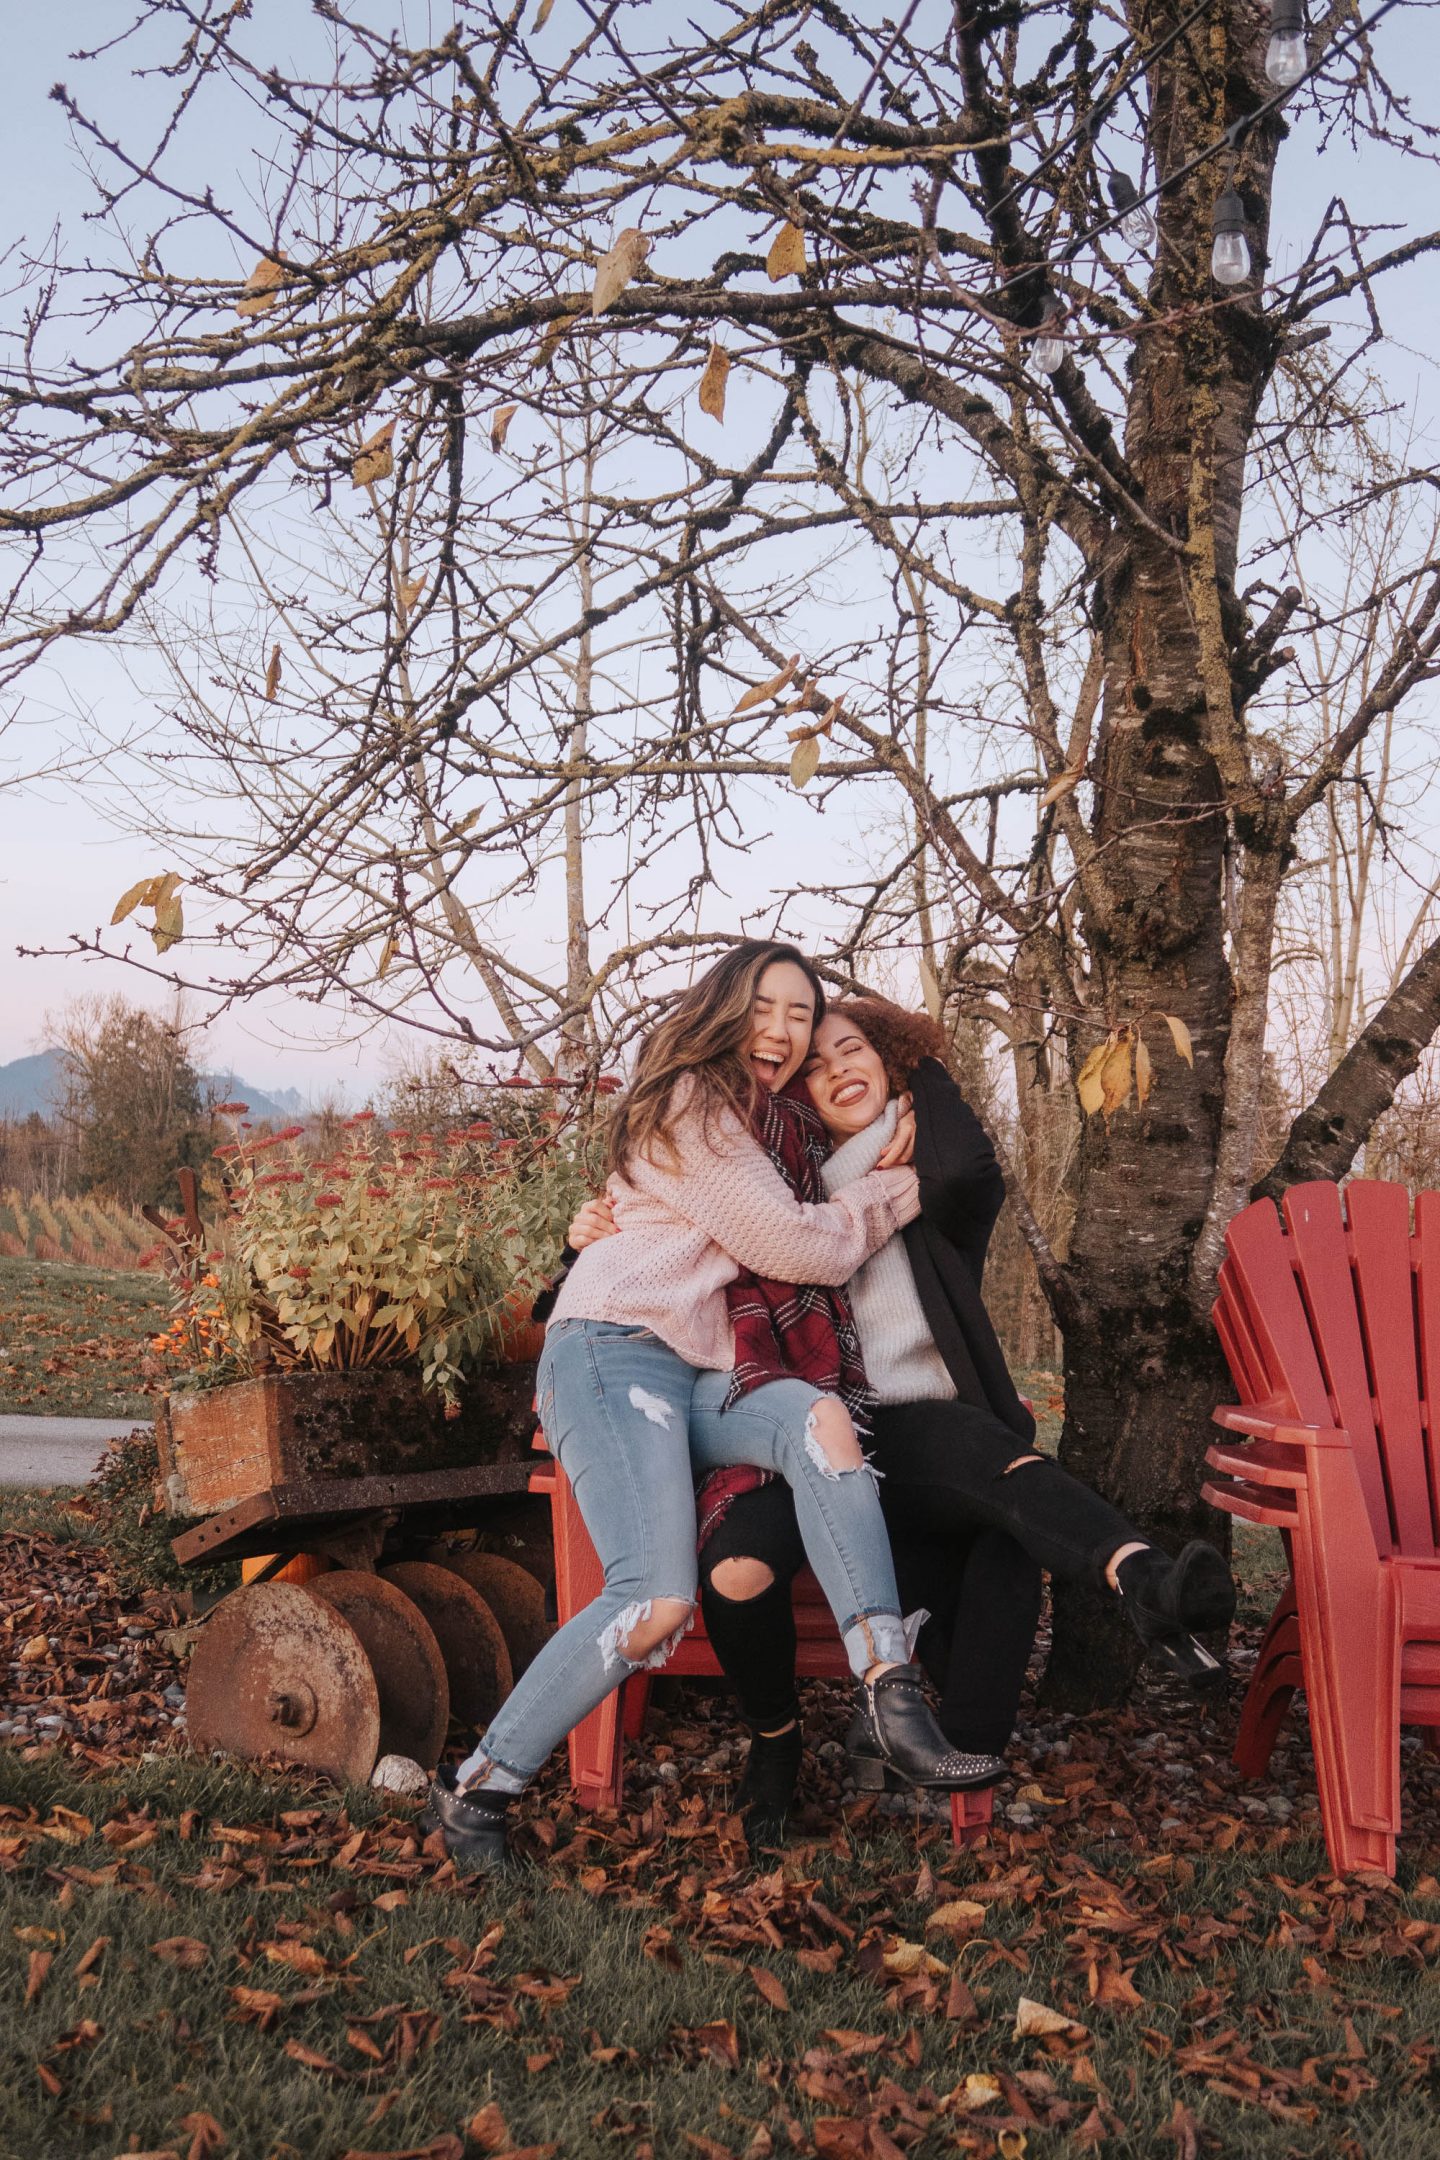 Giving my girlfriend a hug after a wine tour in Abbotsford 